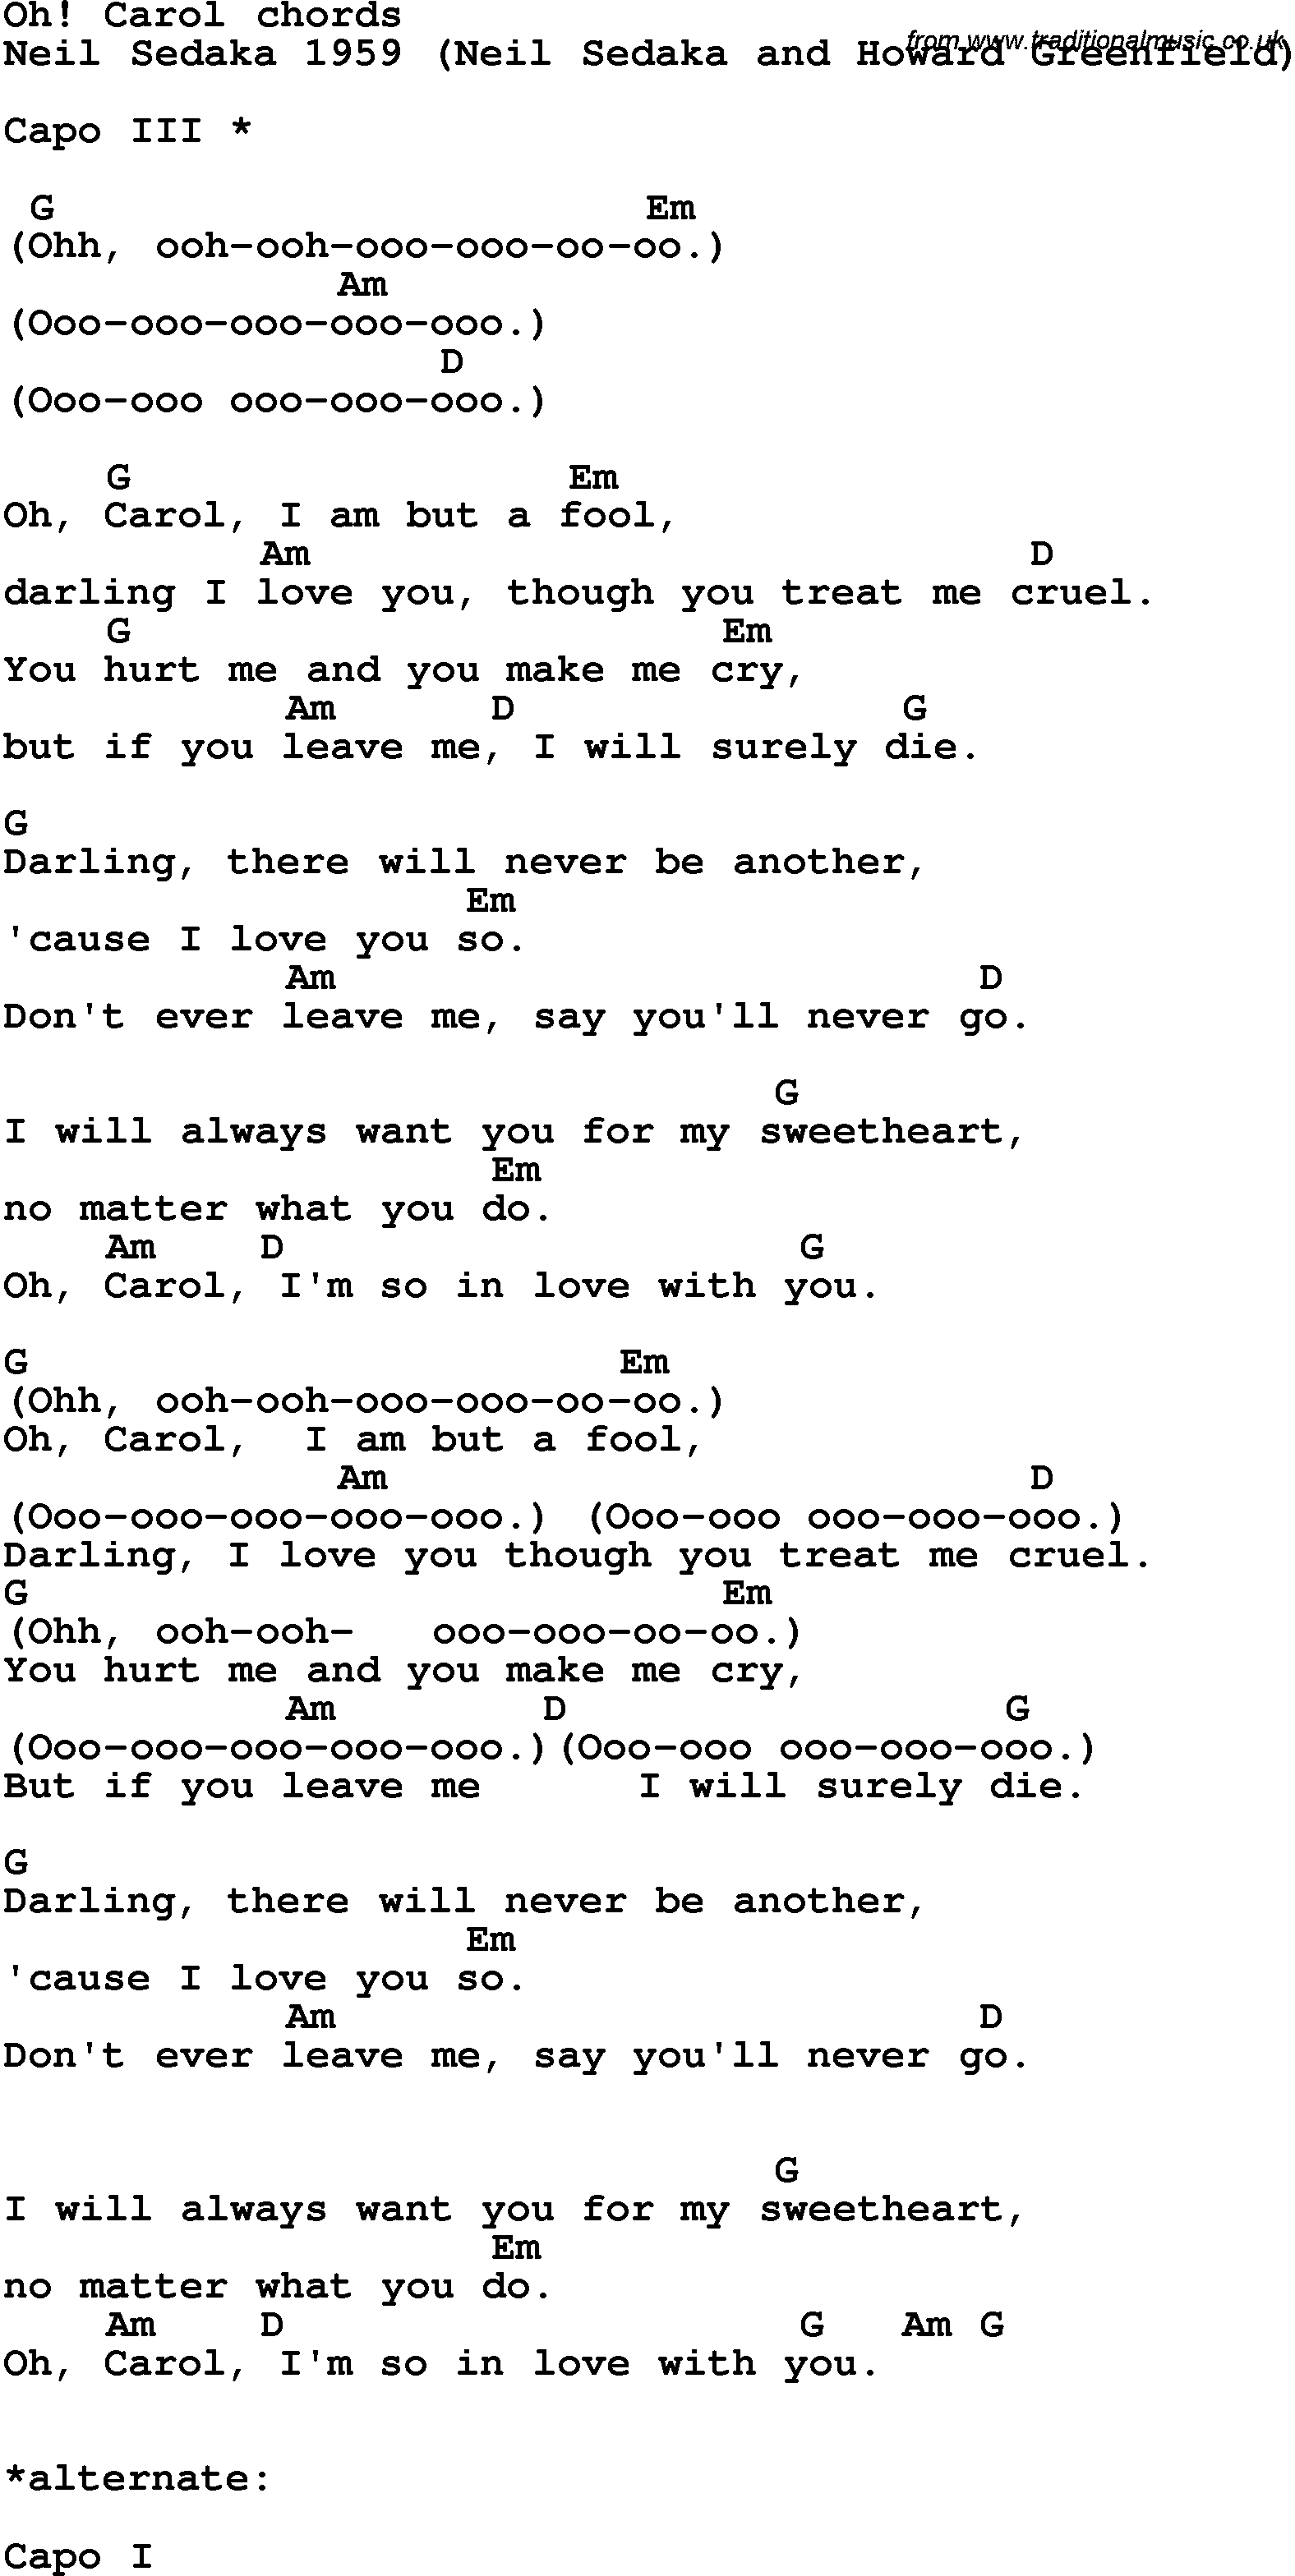 Song Lyrics with guitar chords for Oh! Carol